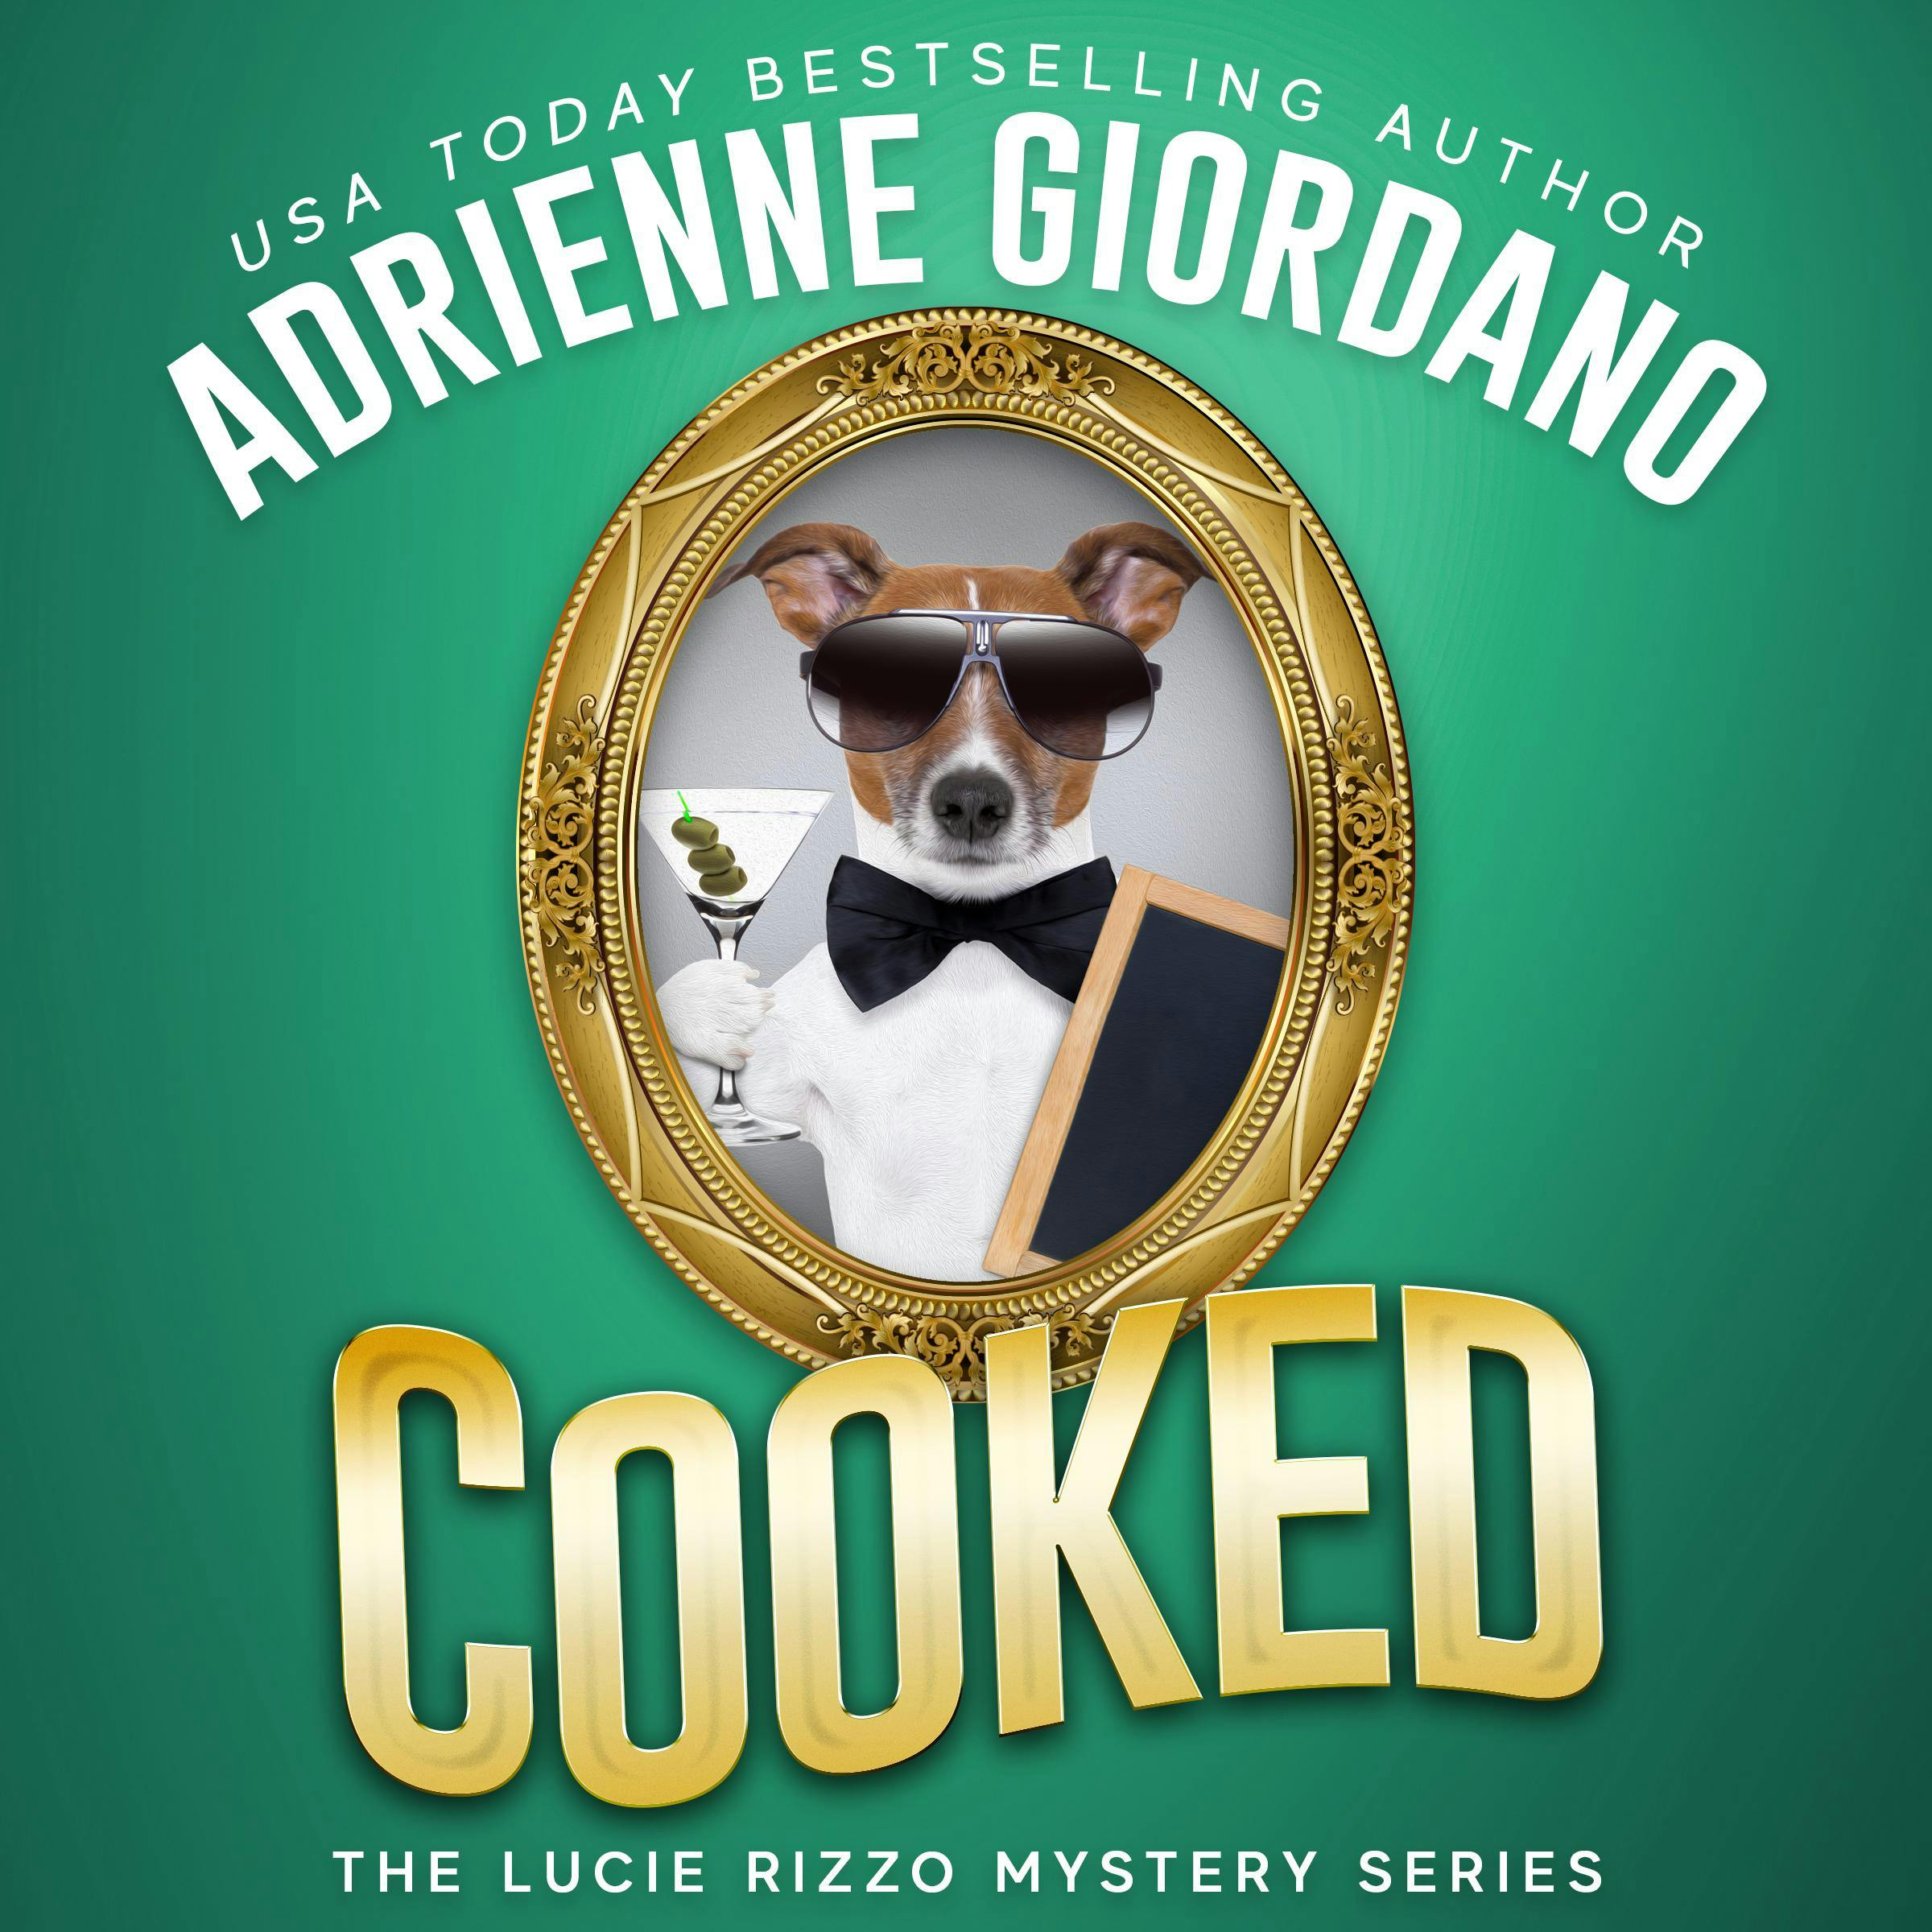 Cooked: A Fast-Paced, Laugh-out-Loud Cozy Culinary Mystery - Adrienne Giordano